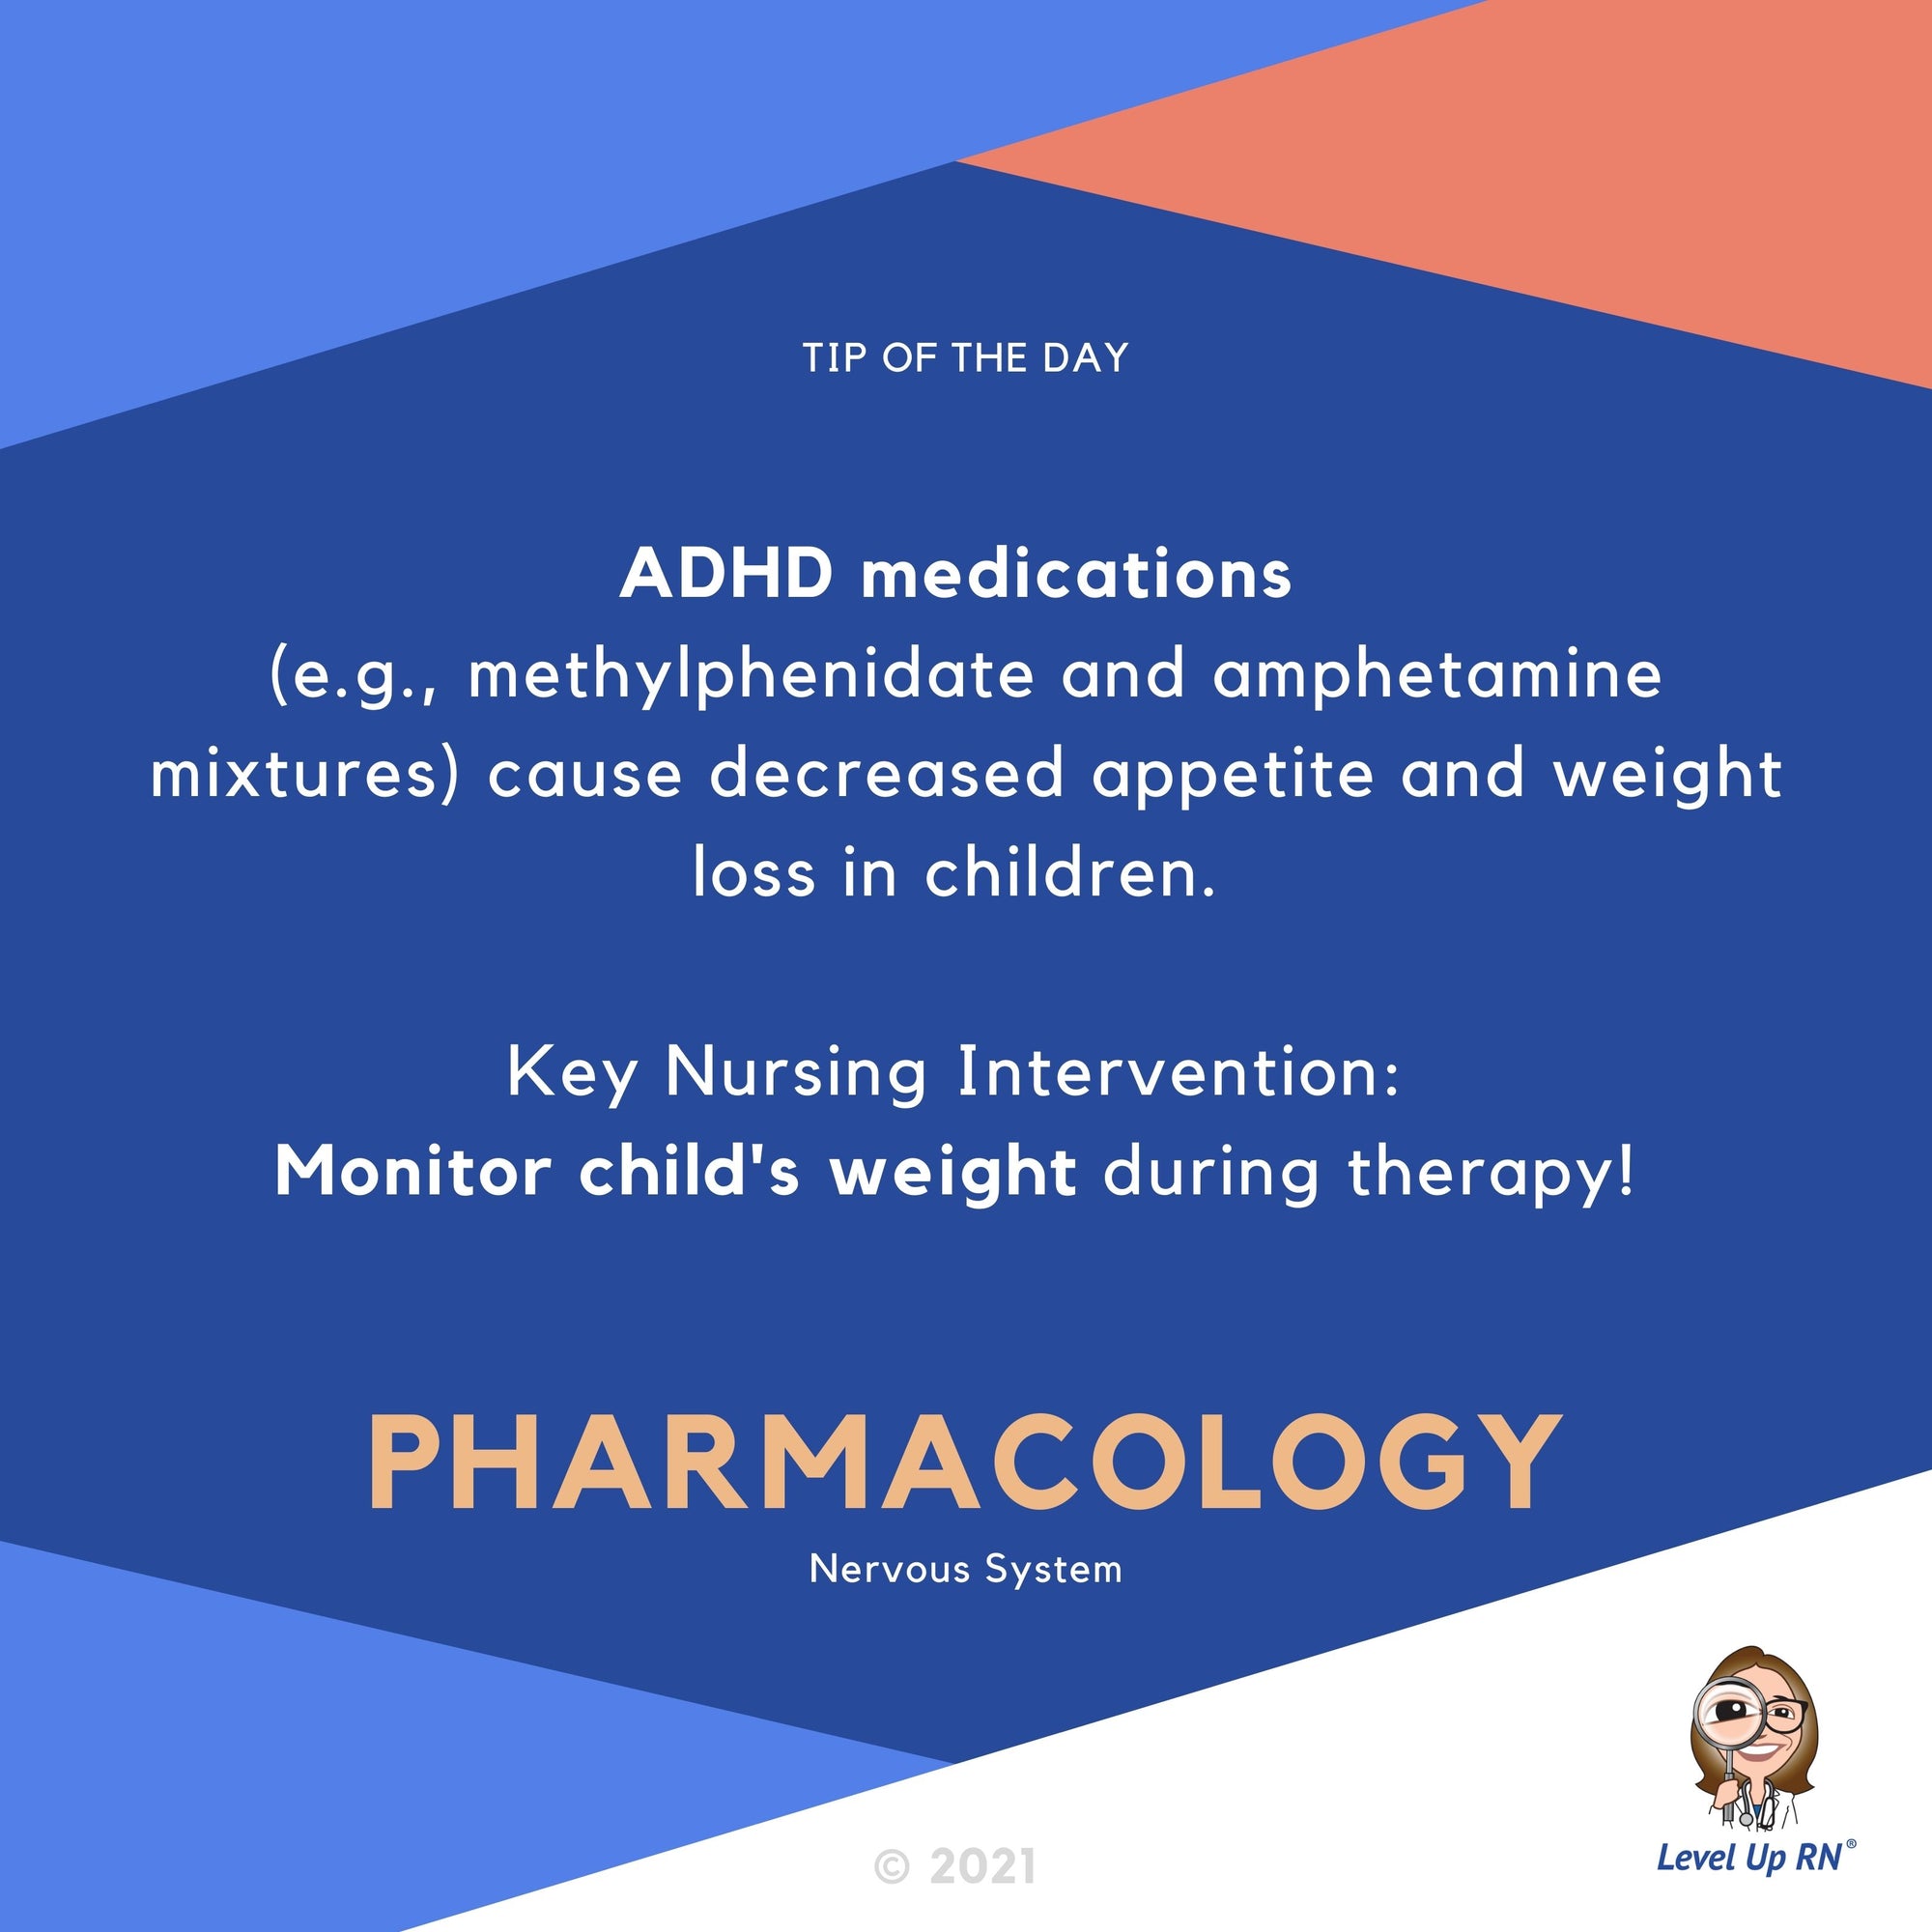 ADHD medications (e.g. methylphenidate and amphetamine mixtures) cause decreased appetite and weight loss in children.  Key Nursing Intervention: Monitor child's weight during therapy! 